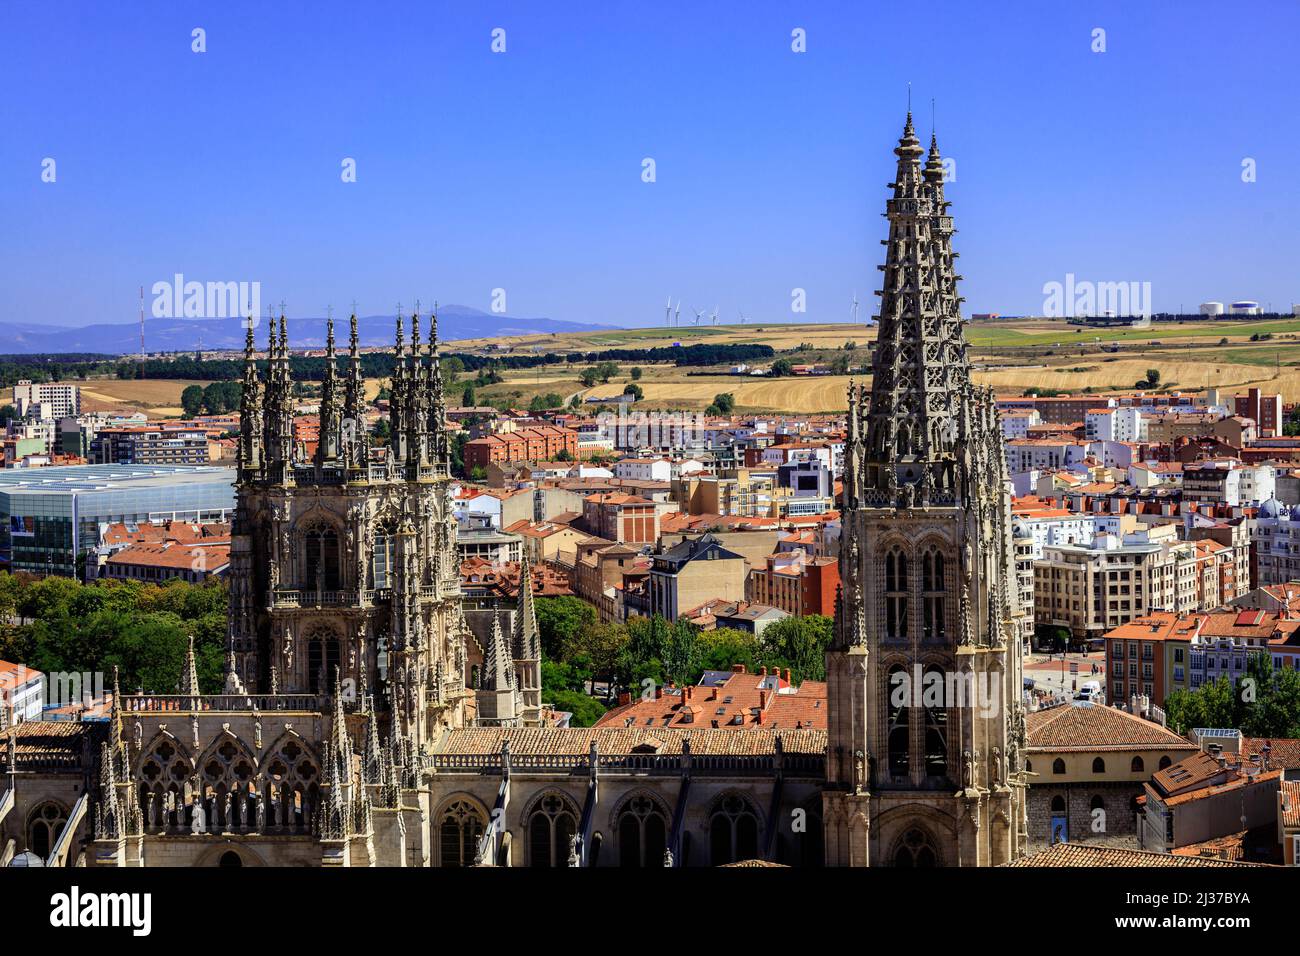 The Cathedral of Saint Mary of Burgos, Spain. It is a Gothic church, part of the UNESCO World Heritage Site. Stock Photo